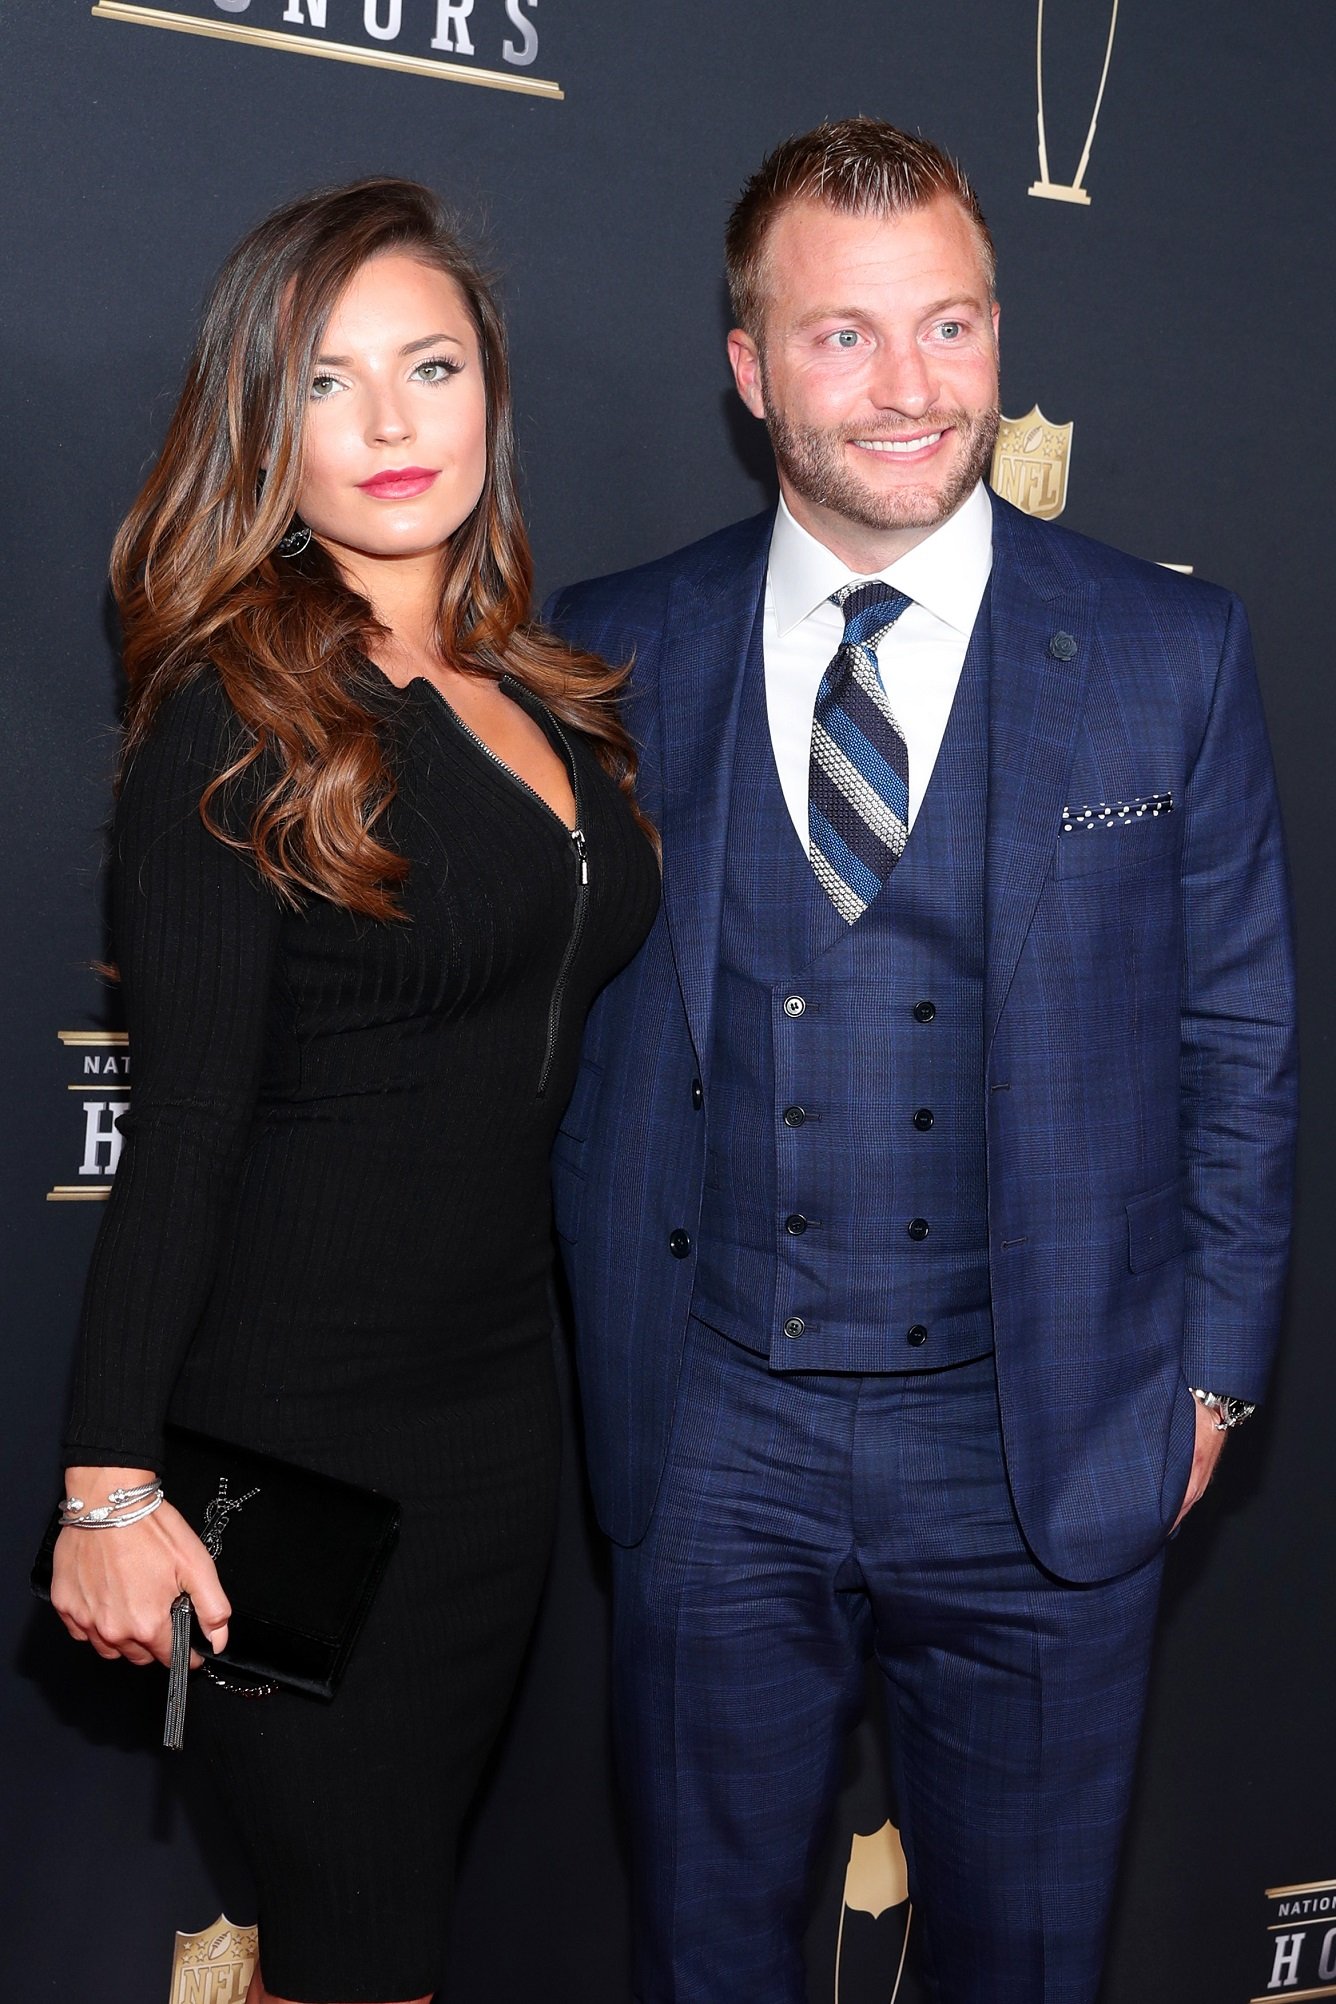 Veronica Khomyn And Sean McVay In An Event (Source: Celebritynetworth)